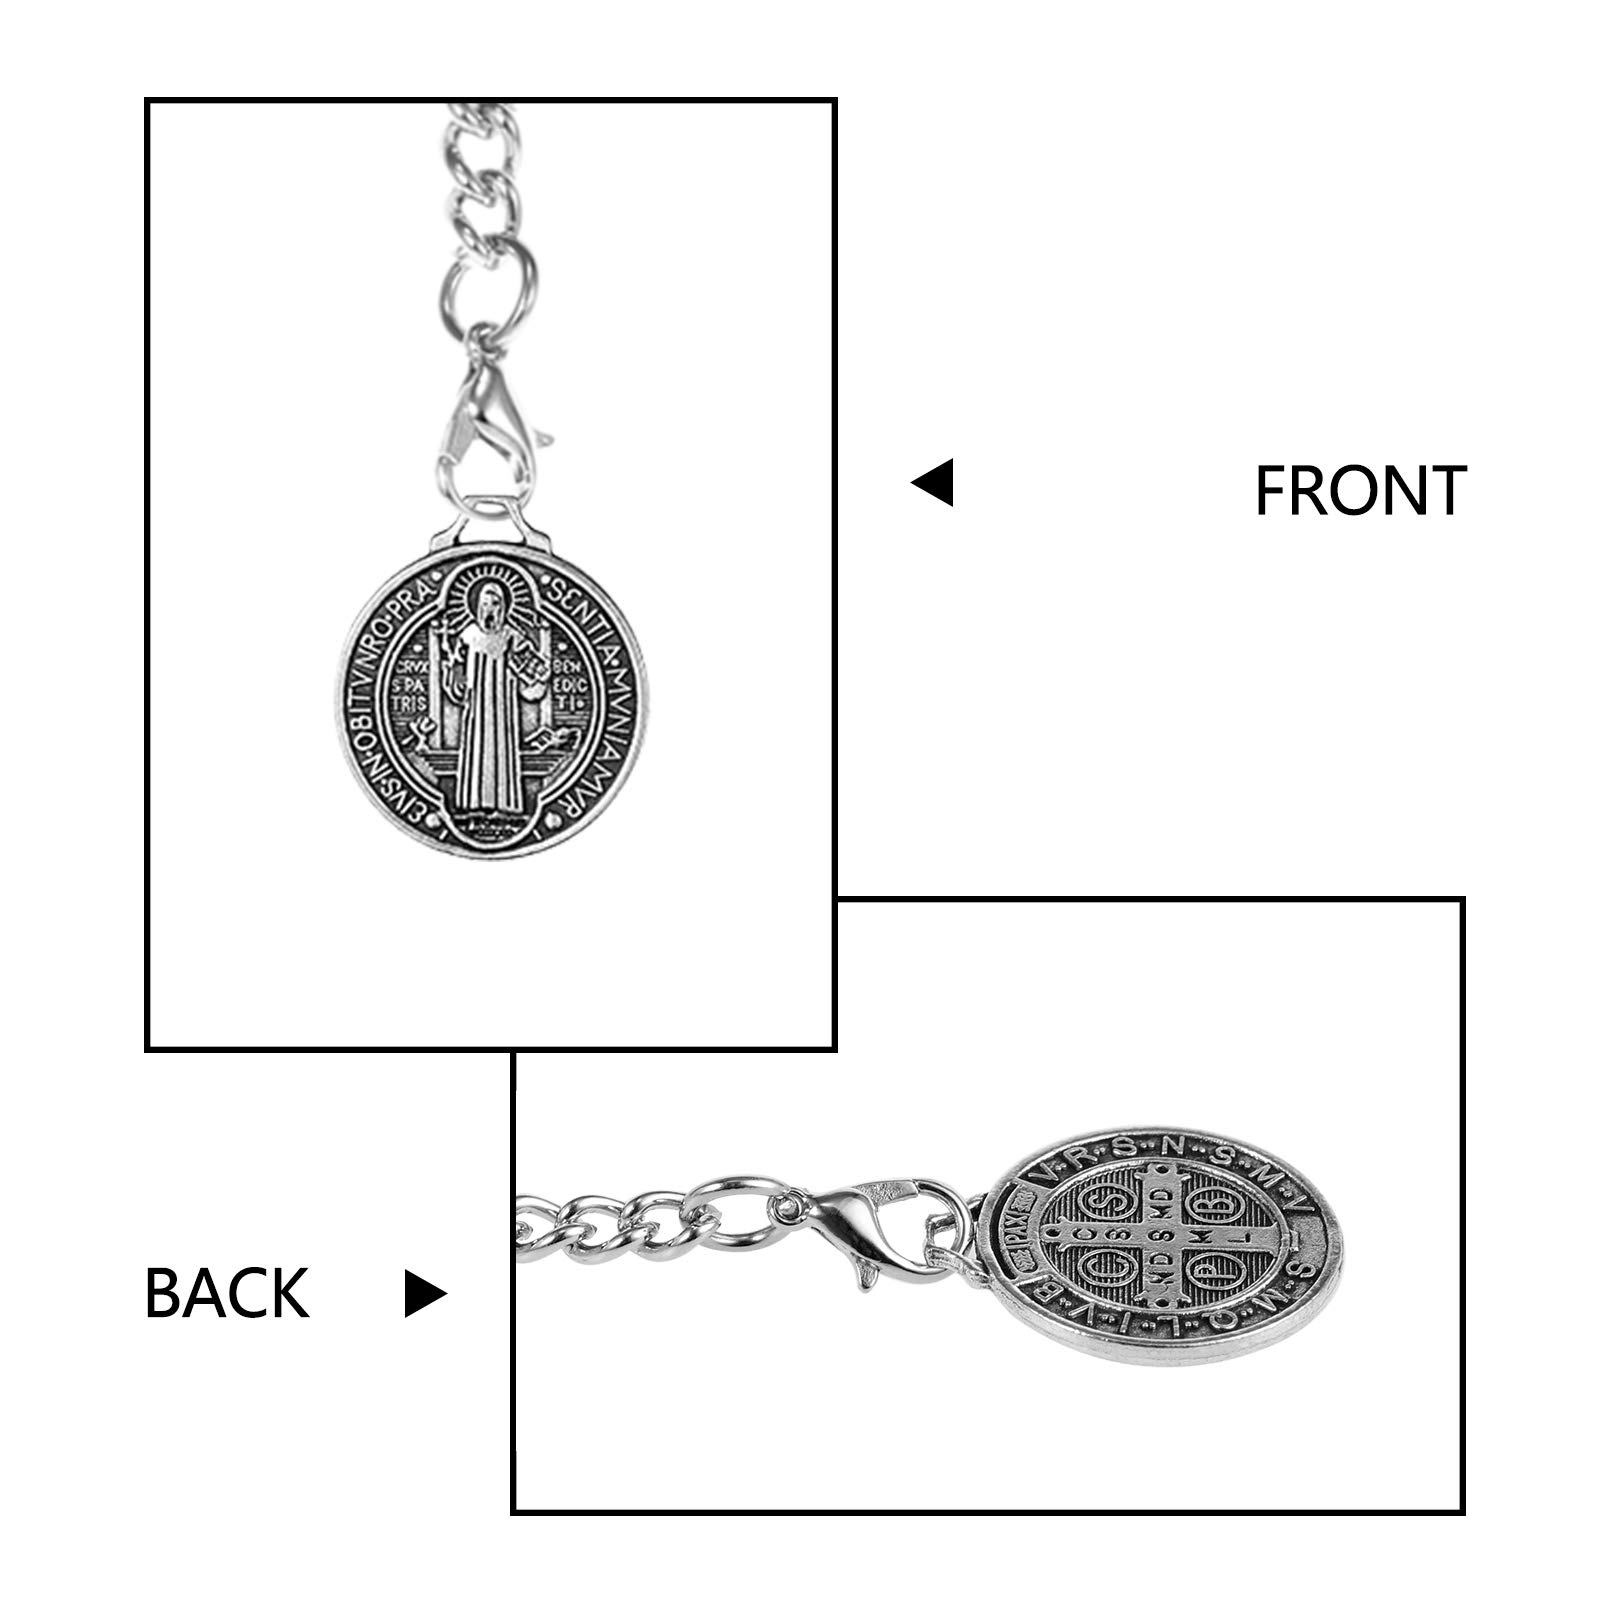 TREEWETO Men's Double Albert Chain Pocket Watch Curb Link Key Chain 2 Hooks with Antique St. Benedict Pendant Design Charm Fob T Bar